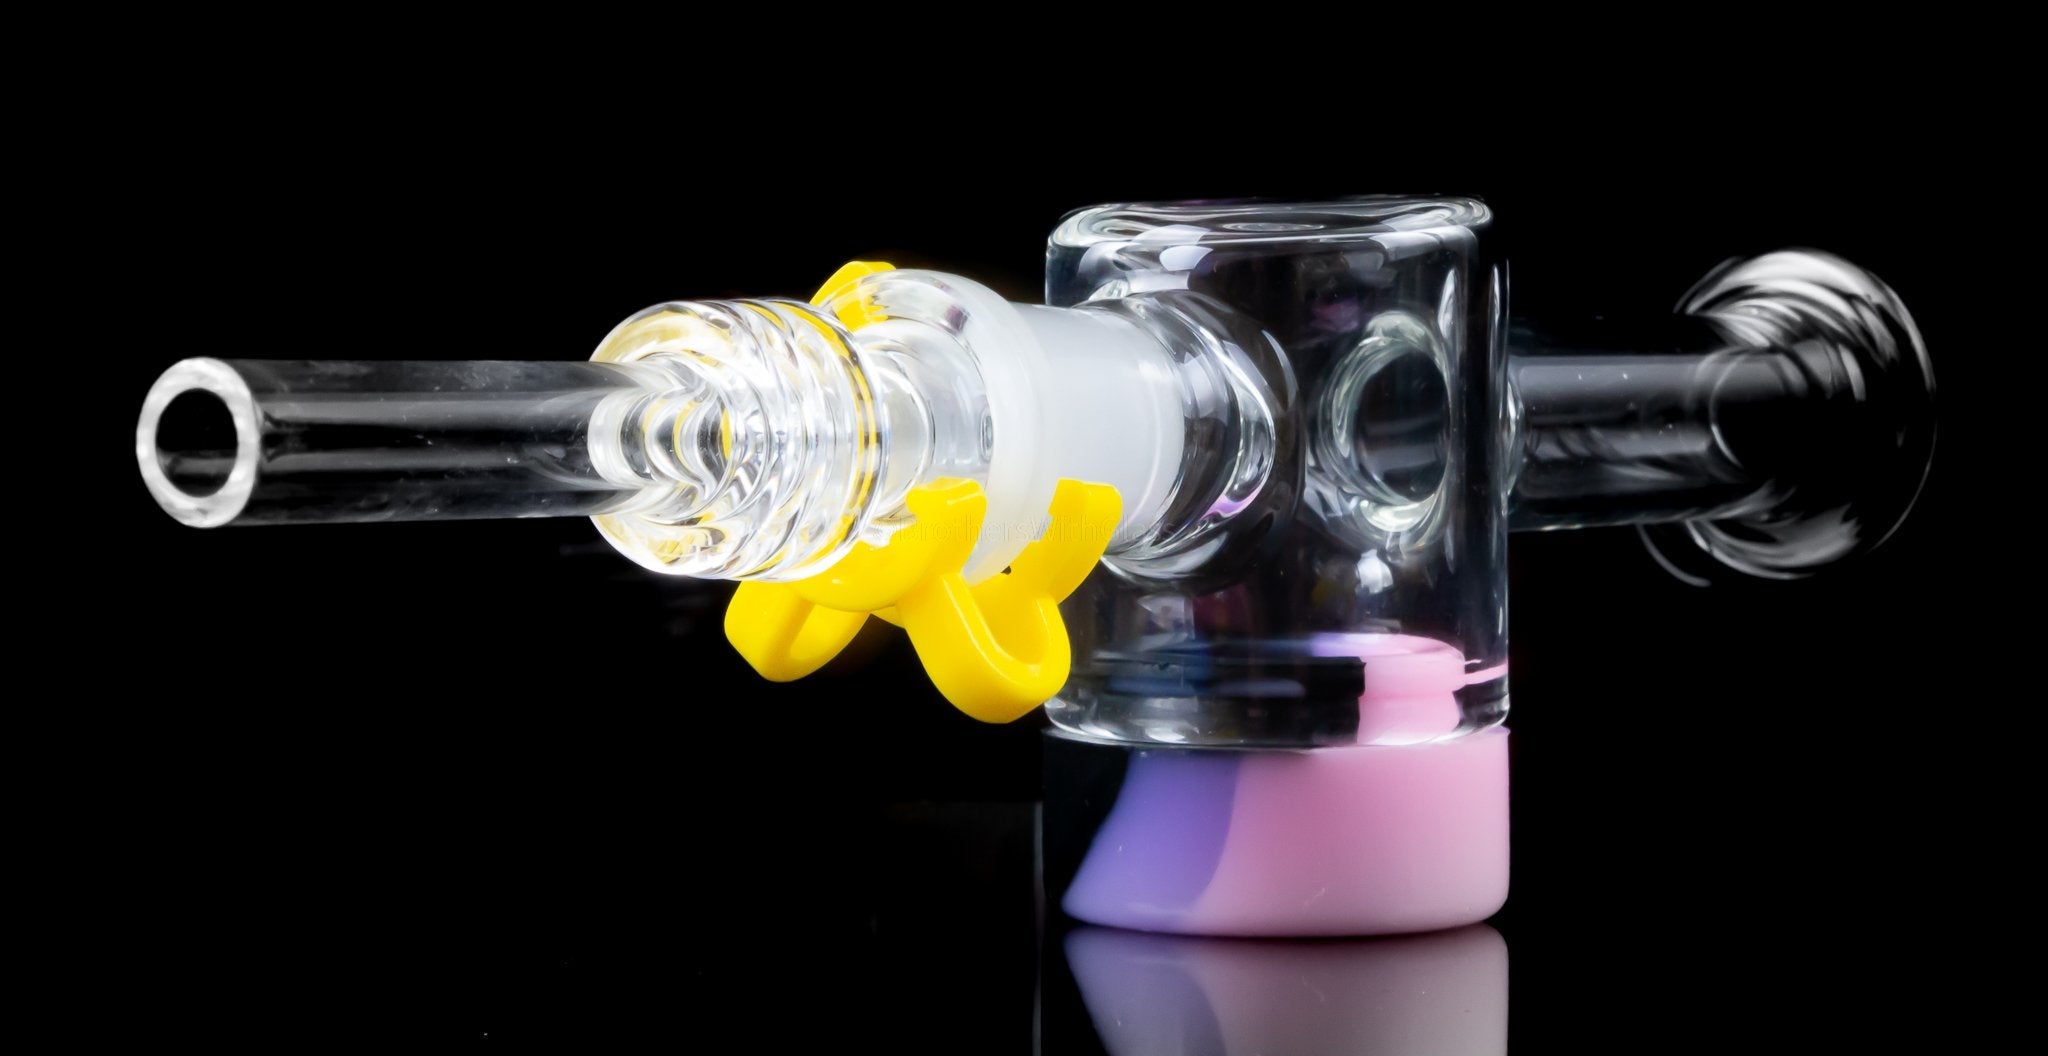 No Label Glass Nectar Collector Silicone Container and Quartz Dab Kit For  Sale